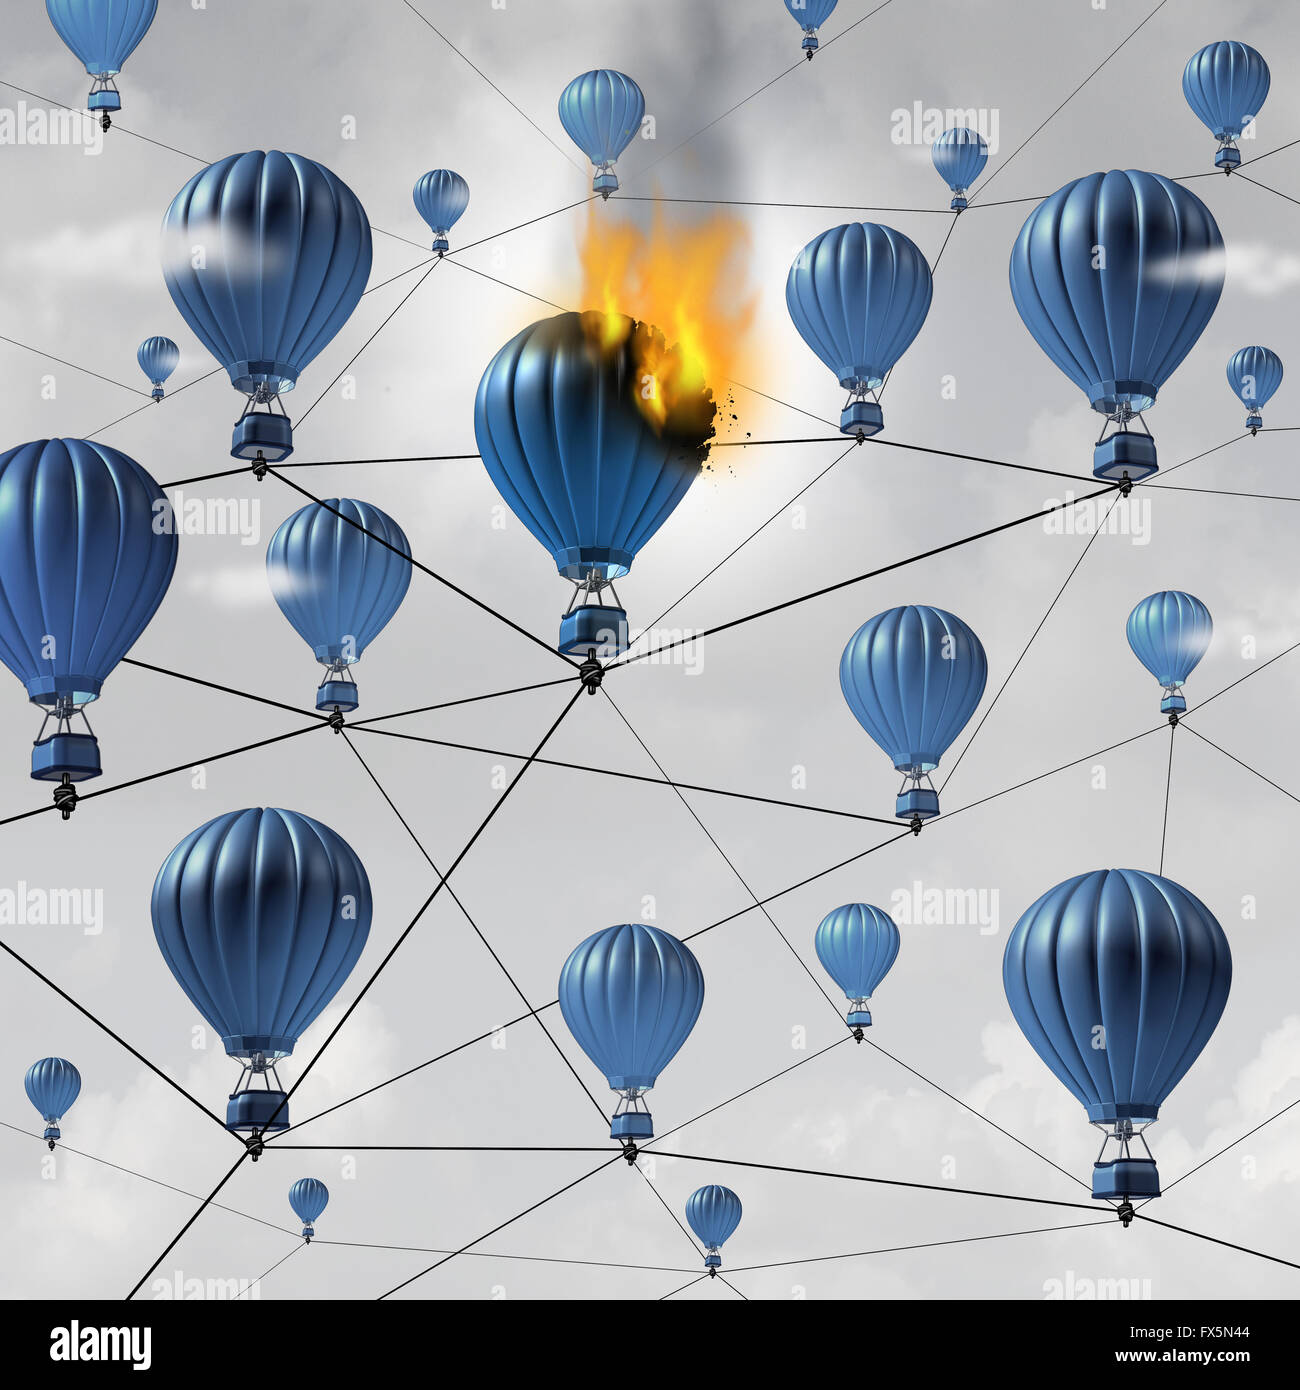 Network connection failure business concept as a burning air balloon burning up in a group of connected air balloons breaking the link in a communication structure as a 3D illustration. Stock Photo